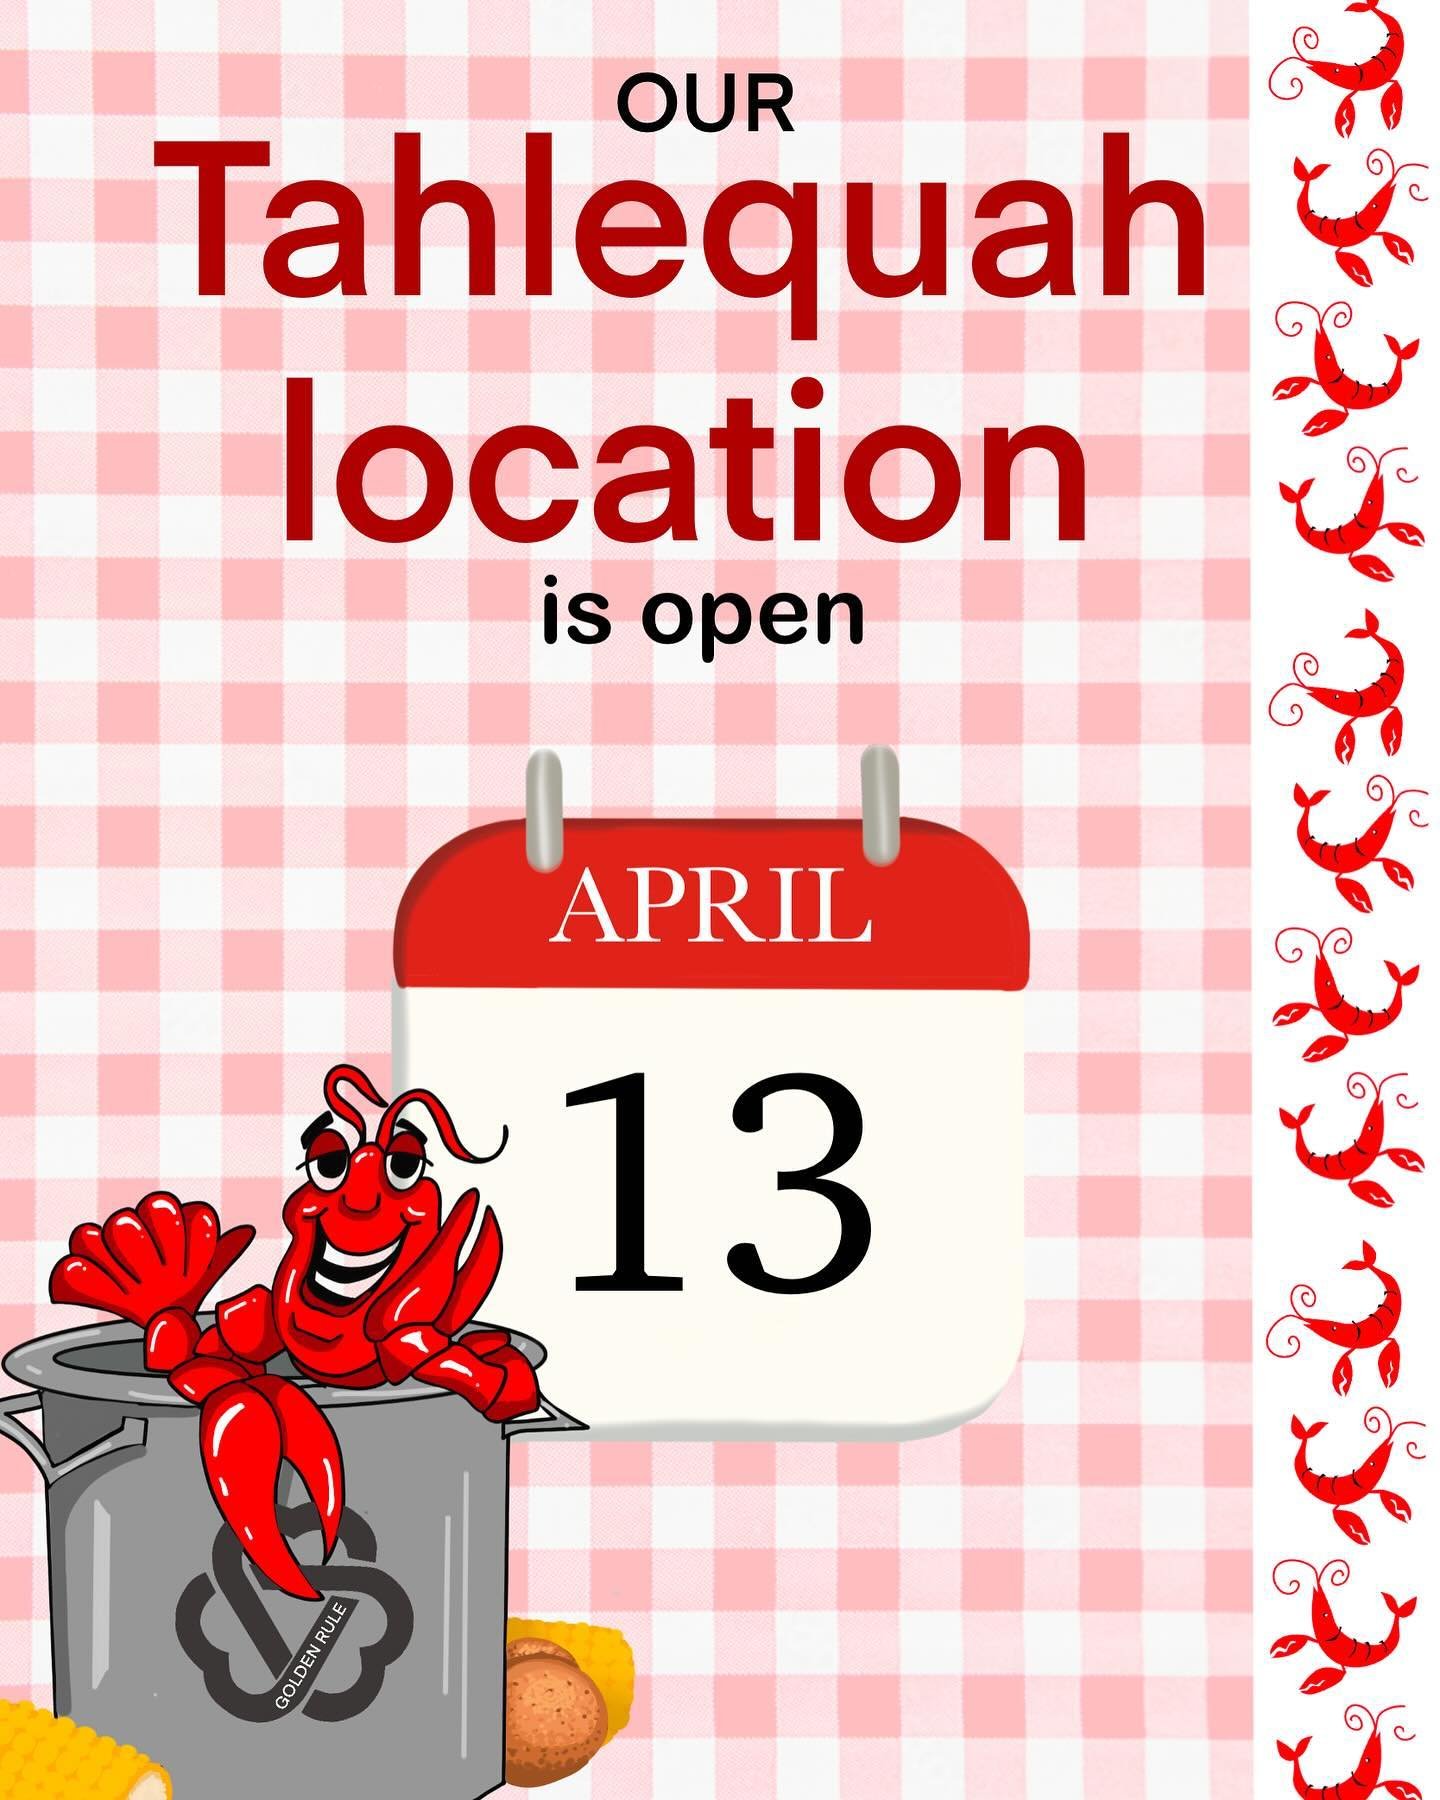 Going to the Crawfish festival tomorrow? Stop by our Tahlequah location and shop! 🦞🦞🦞🦞